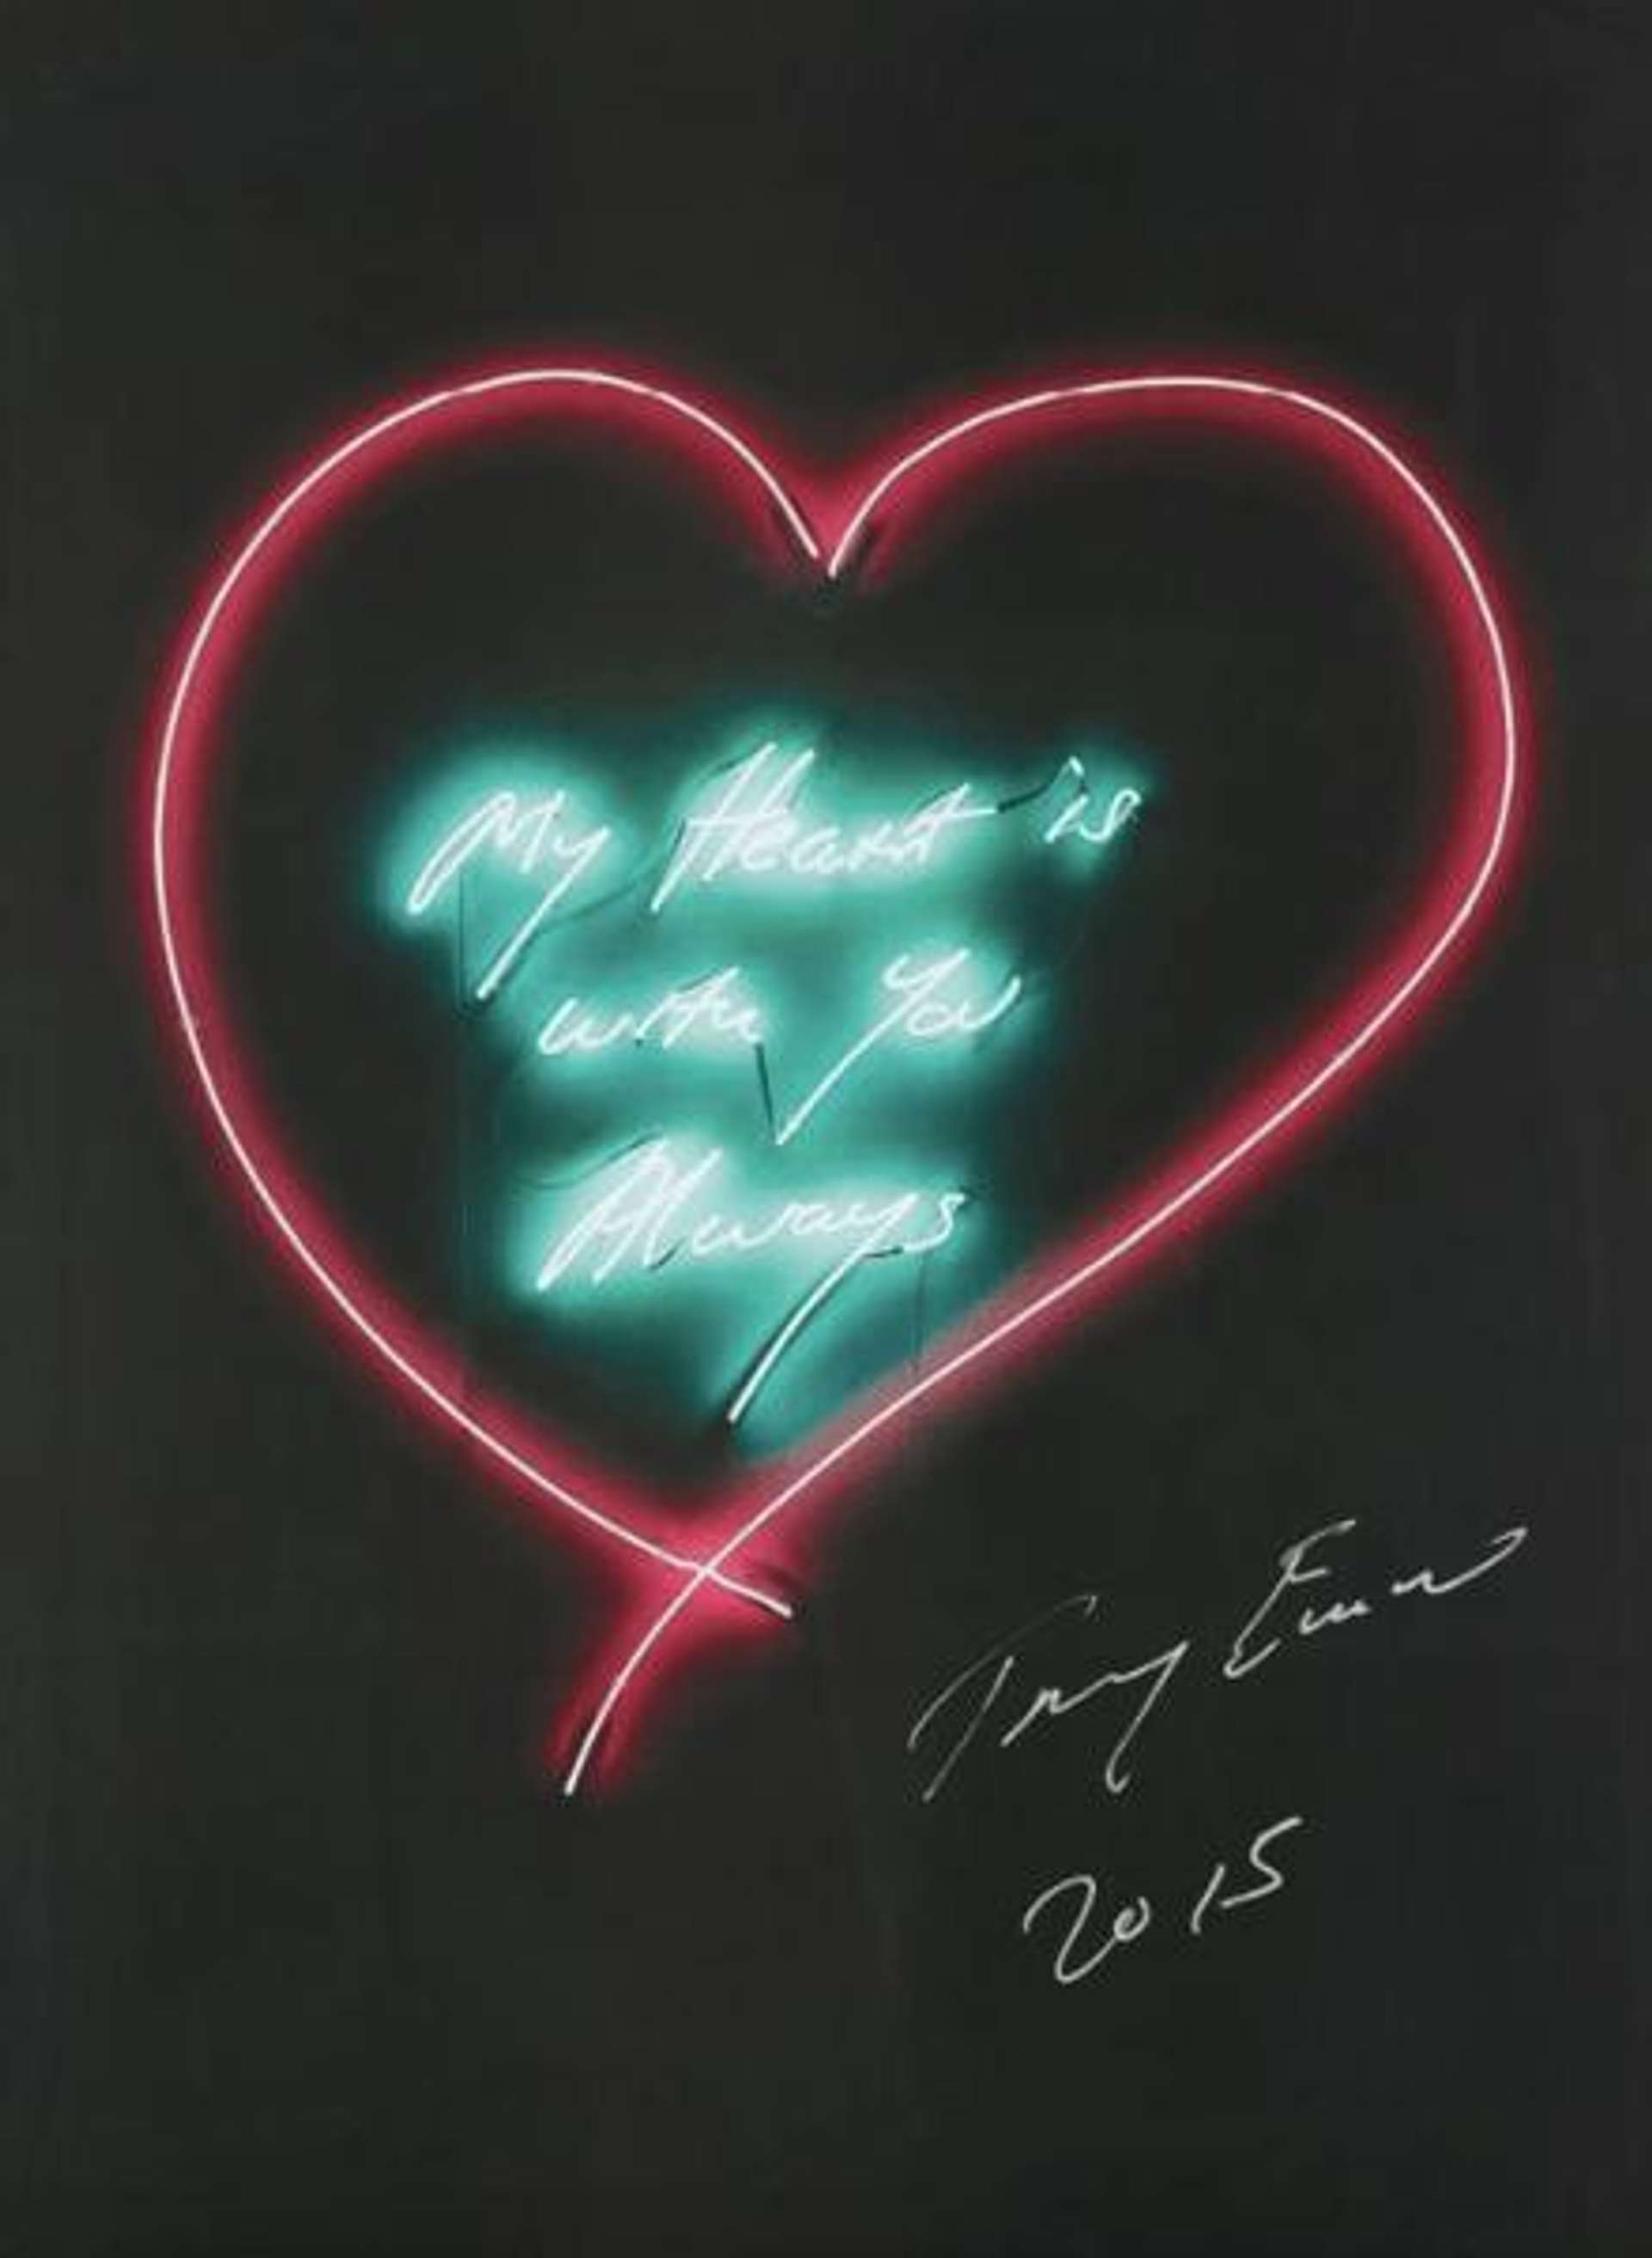 Tracey Emin’s My Heart Is With You Always (black). A lithograph of a neon sign of the words “My heart is with you always” inside of the outline of a red heart.